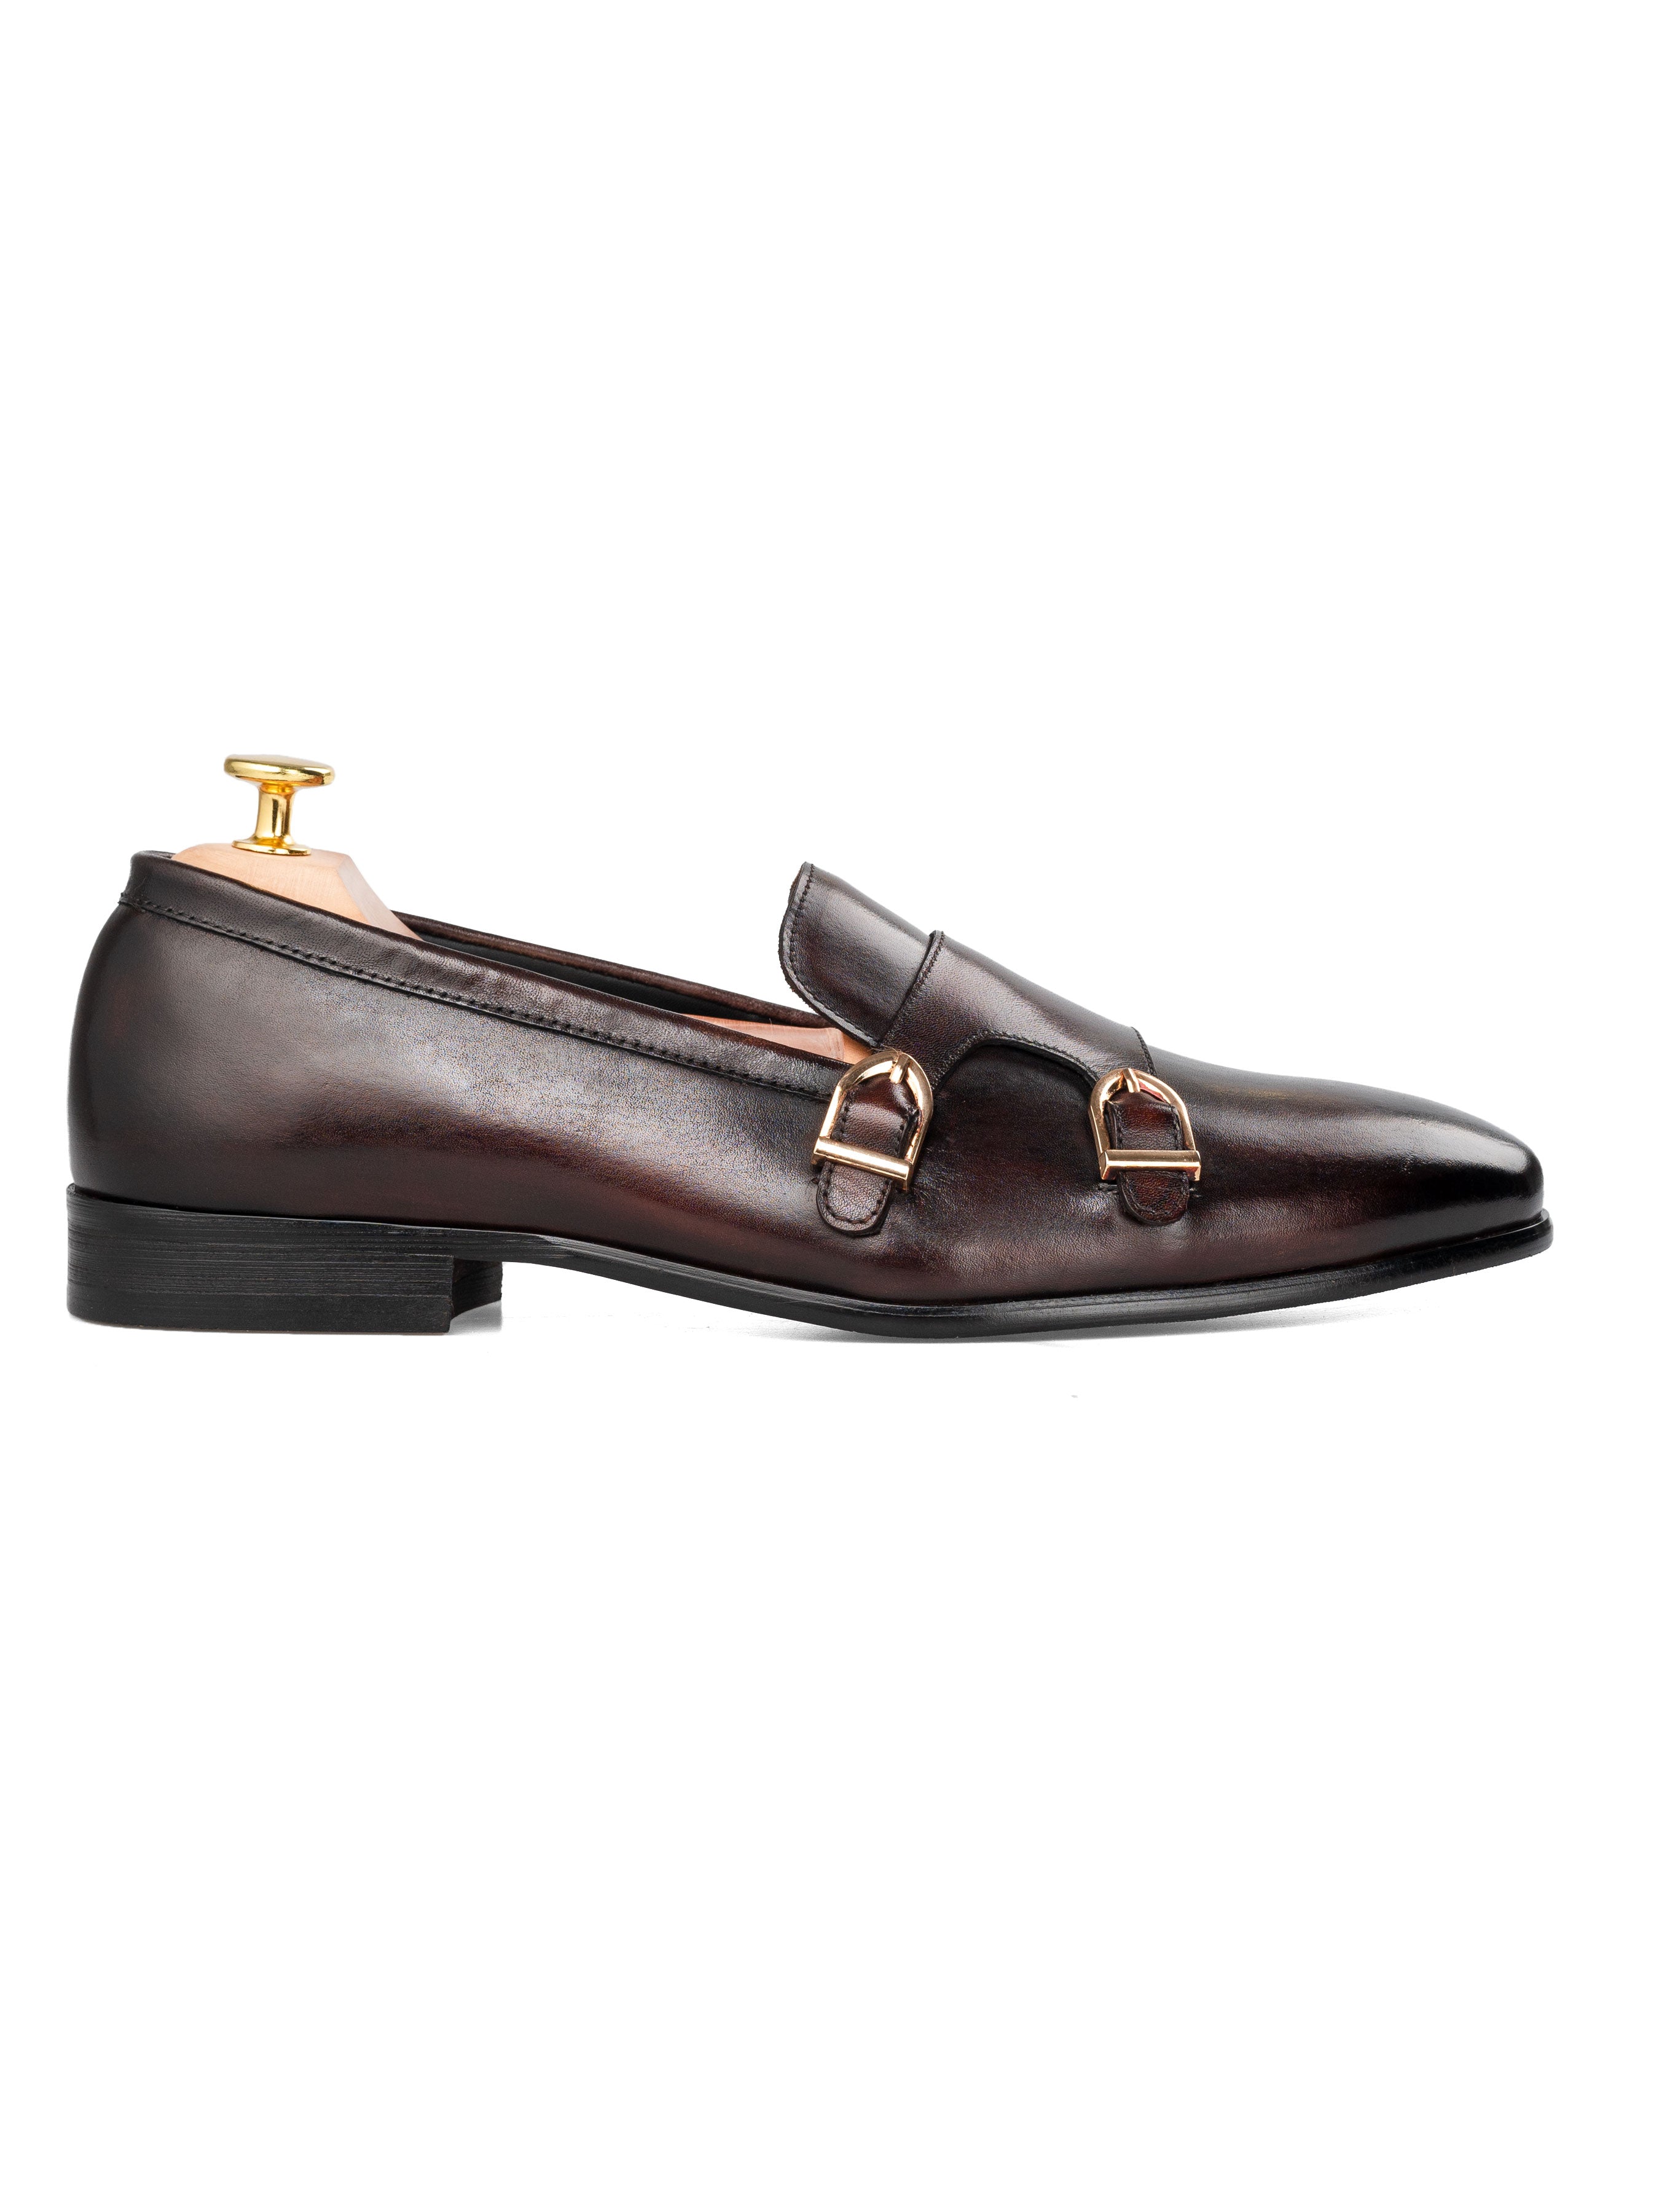 Alfeo Loafer Slipper - Dark Brown Double Monk Strap (Hand Painted Patina)